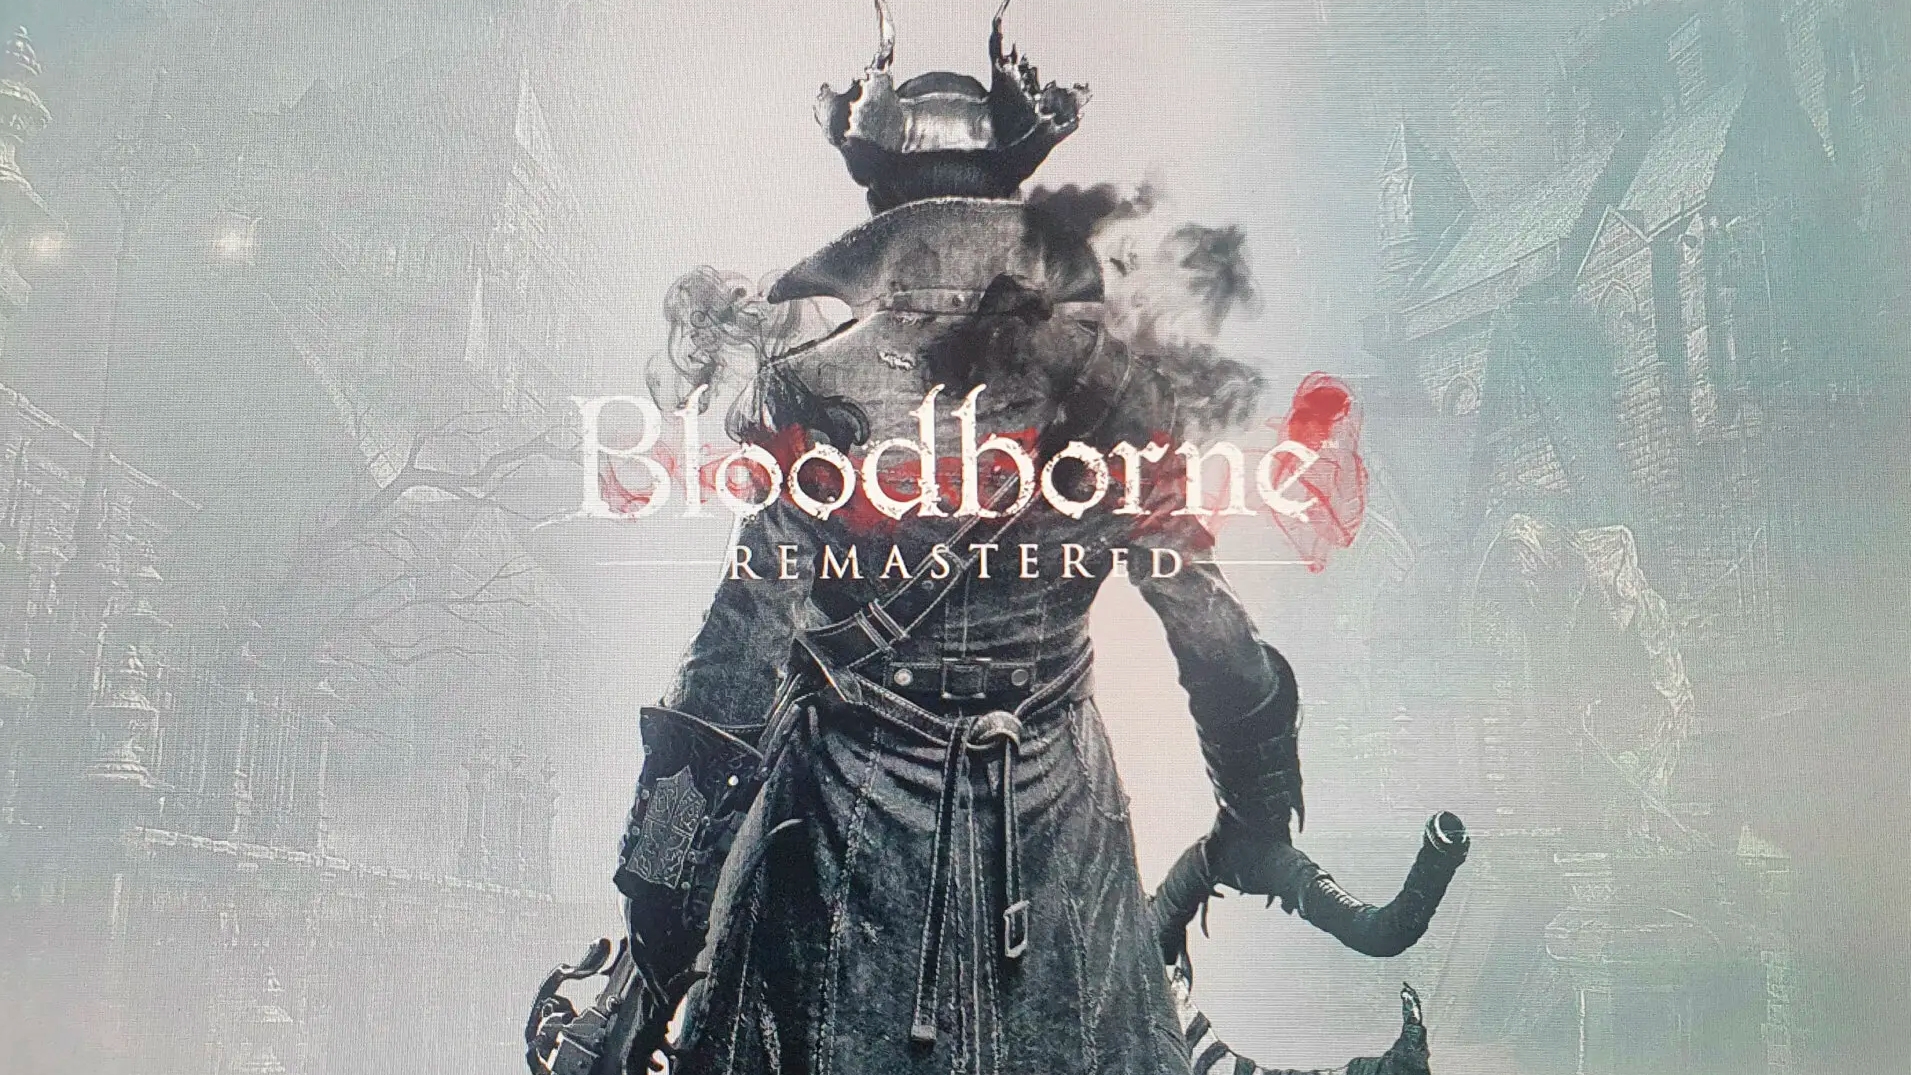 Bloodborne Remaster Confirmed? It Certainly Seems that Way